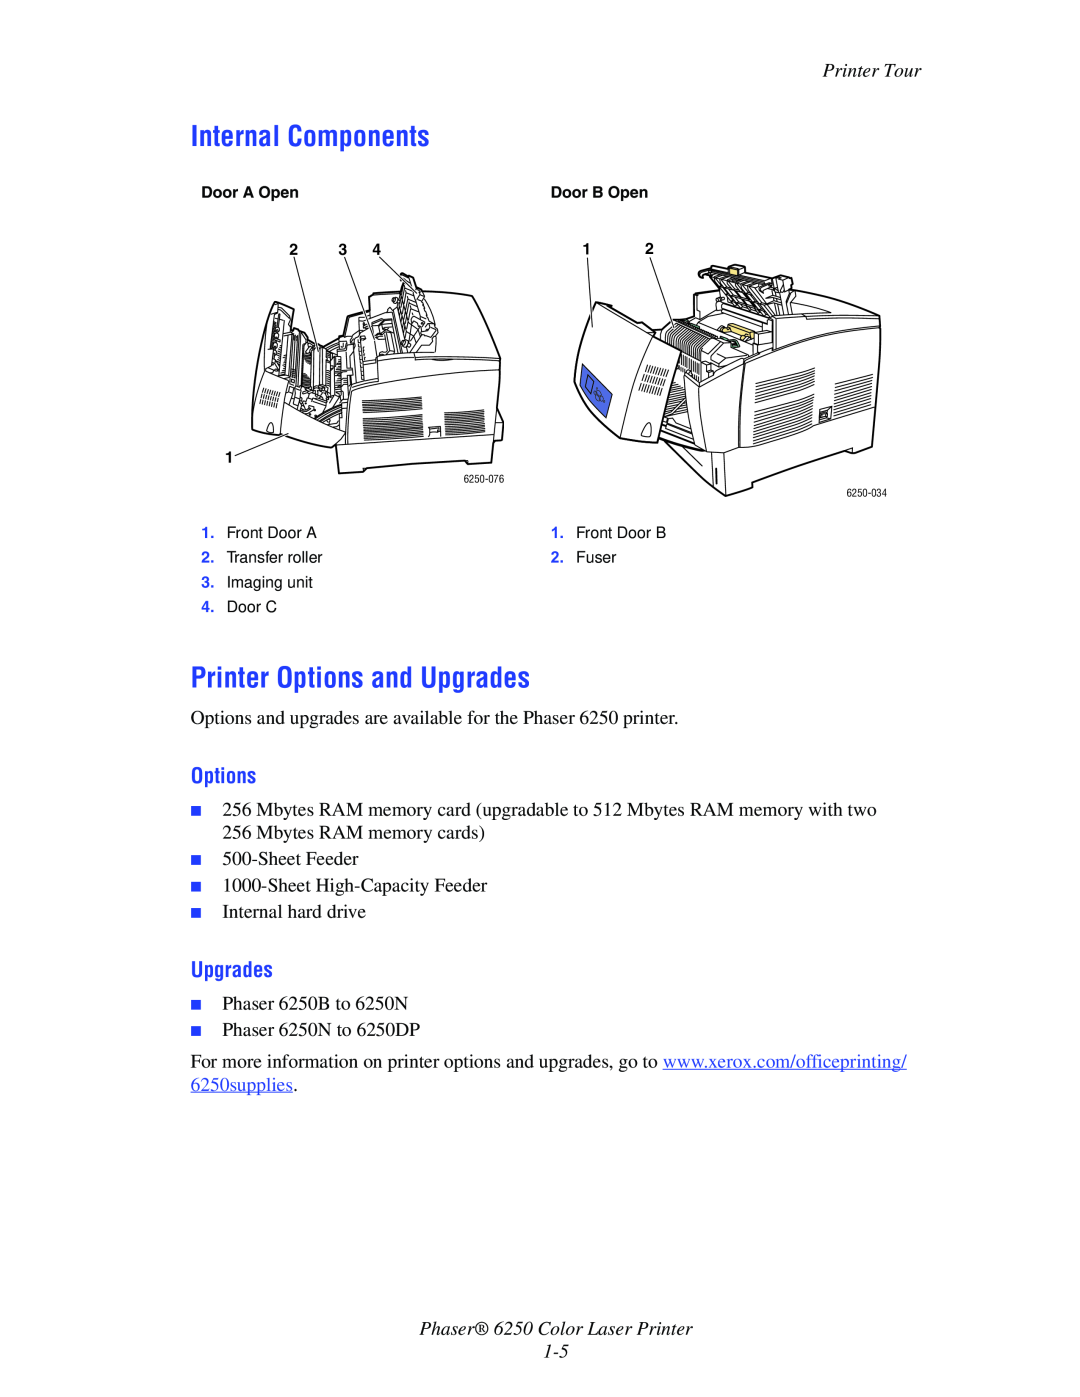 Xerox manual Internal Components, Printer Options and Upgrades, Phaser 6250 Color Laser Printer 1-5, Printer Tour 